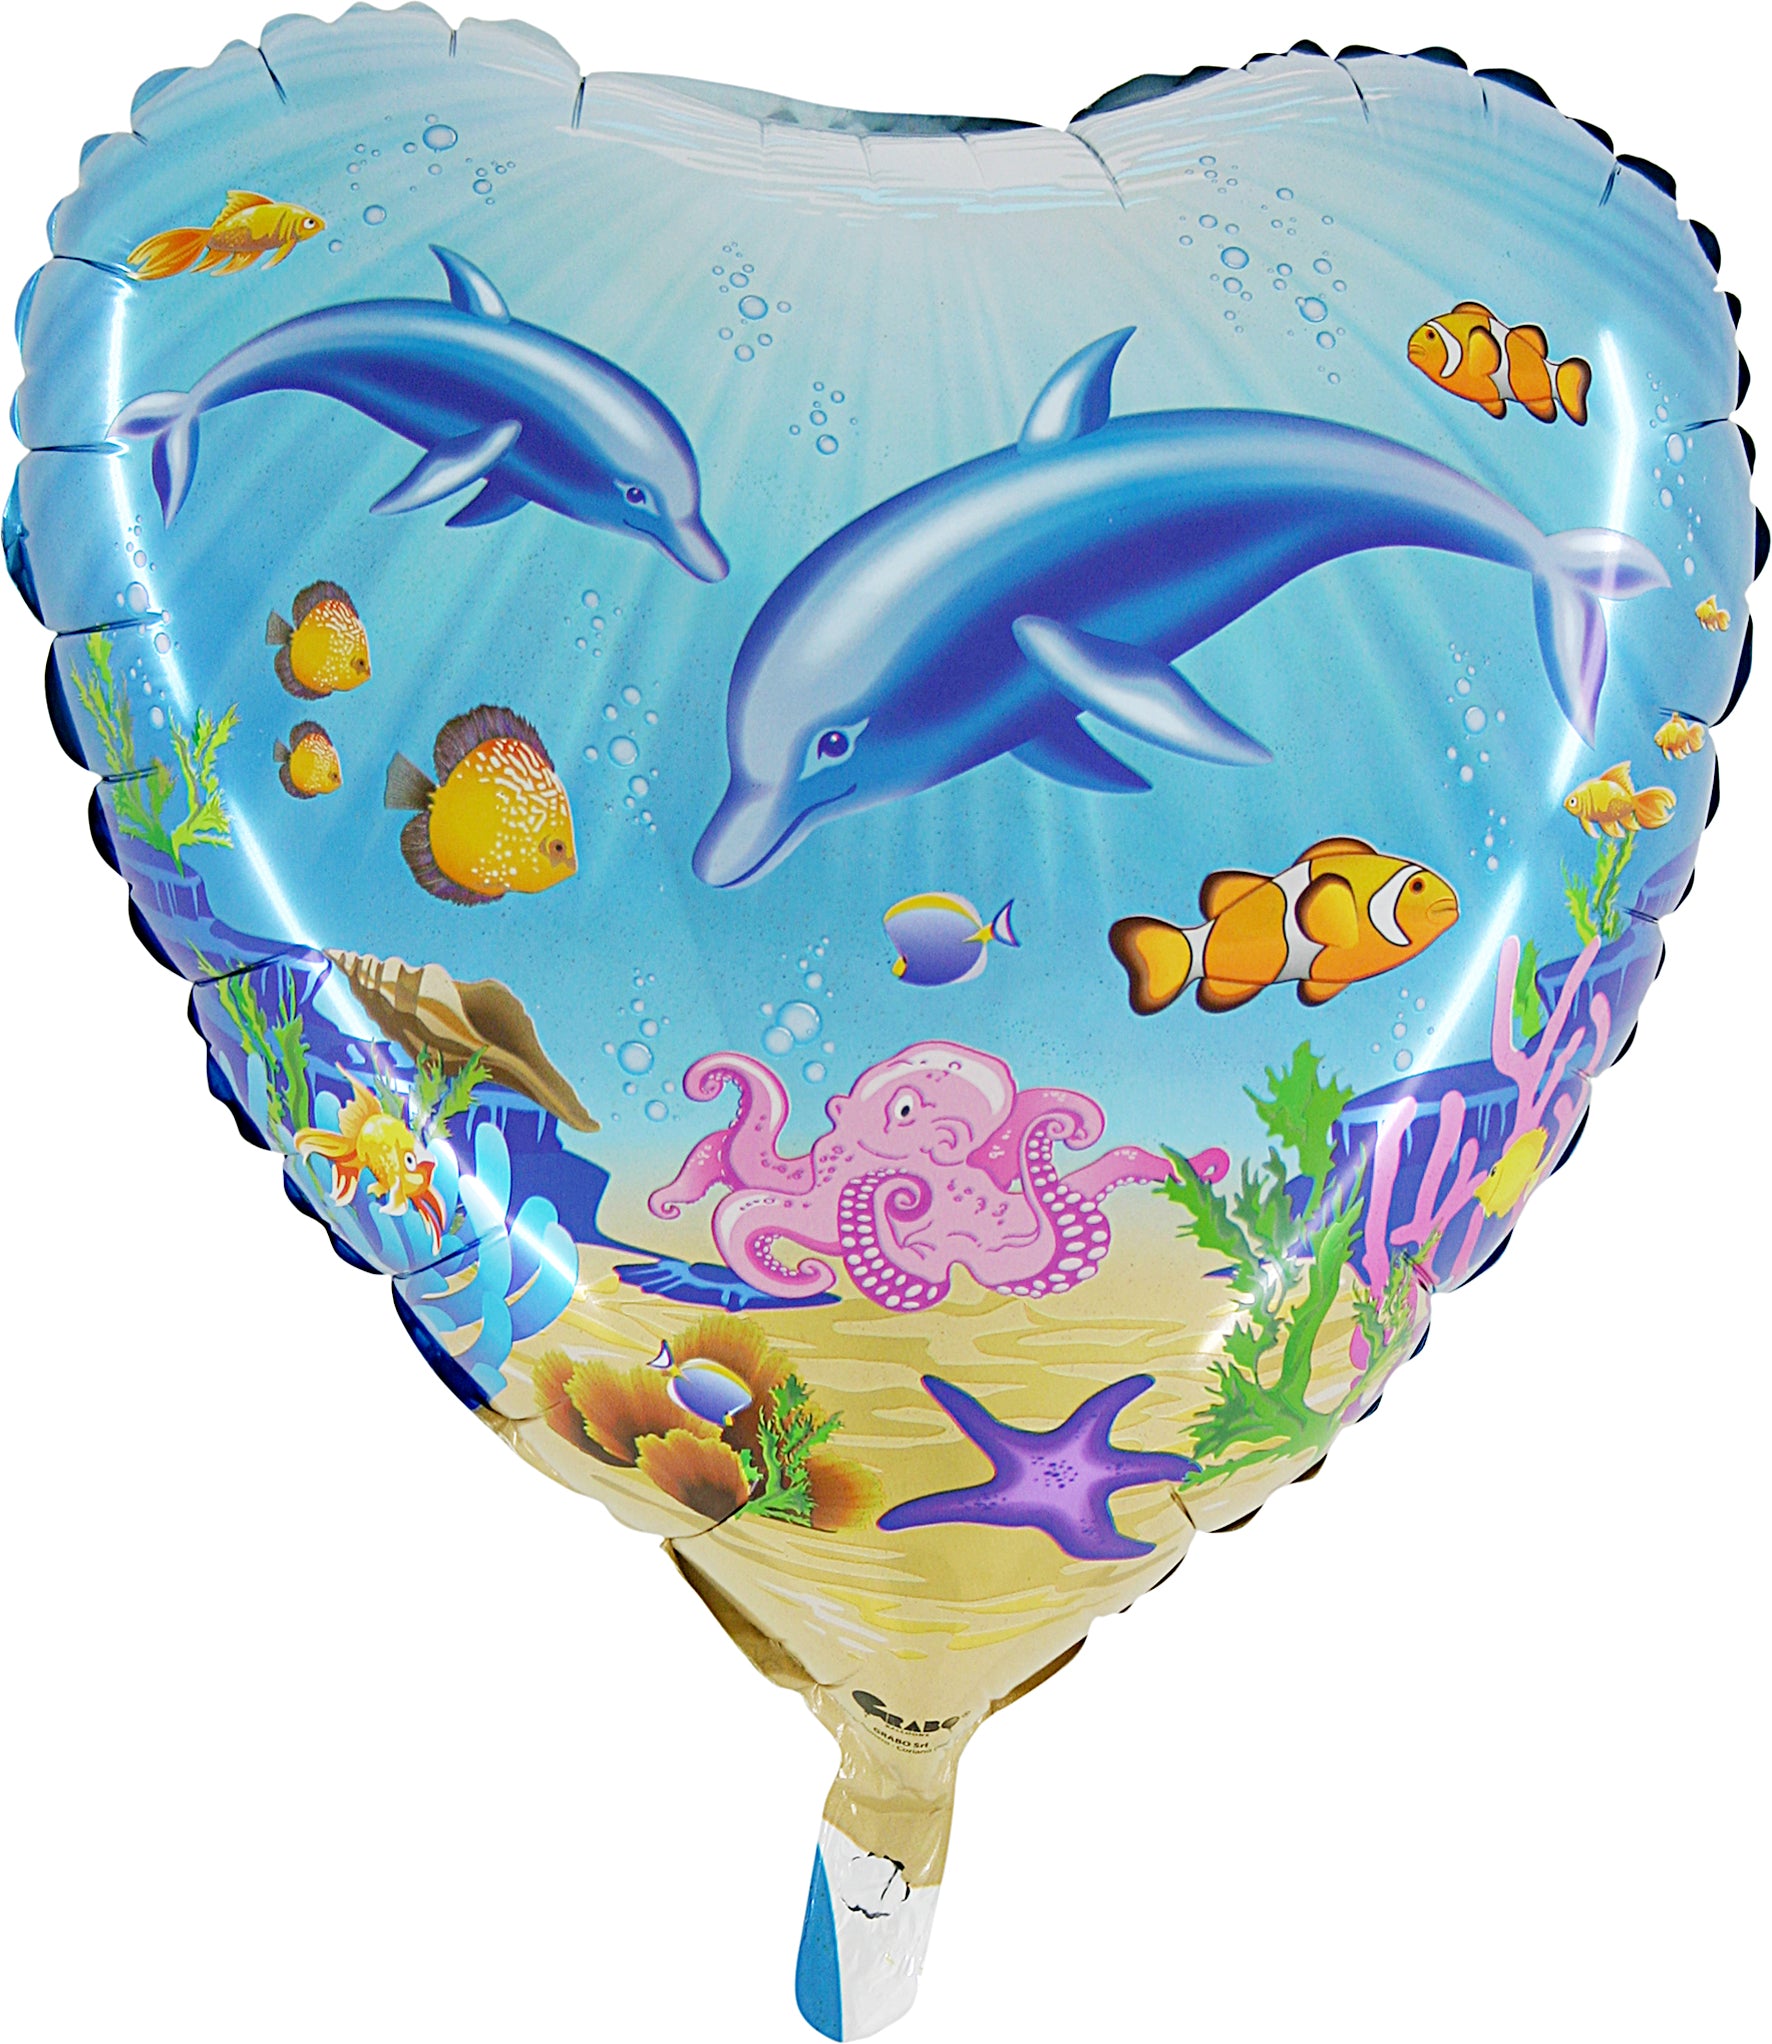 colorful heart shaped balloon with dolphins and ocean